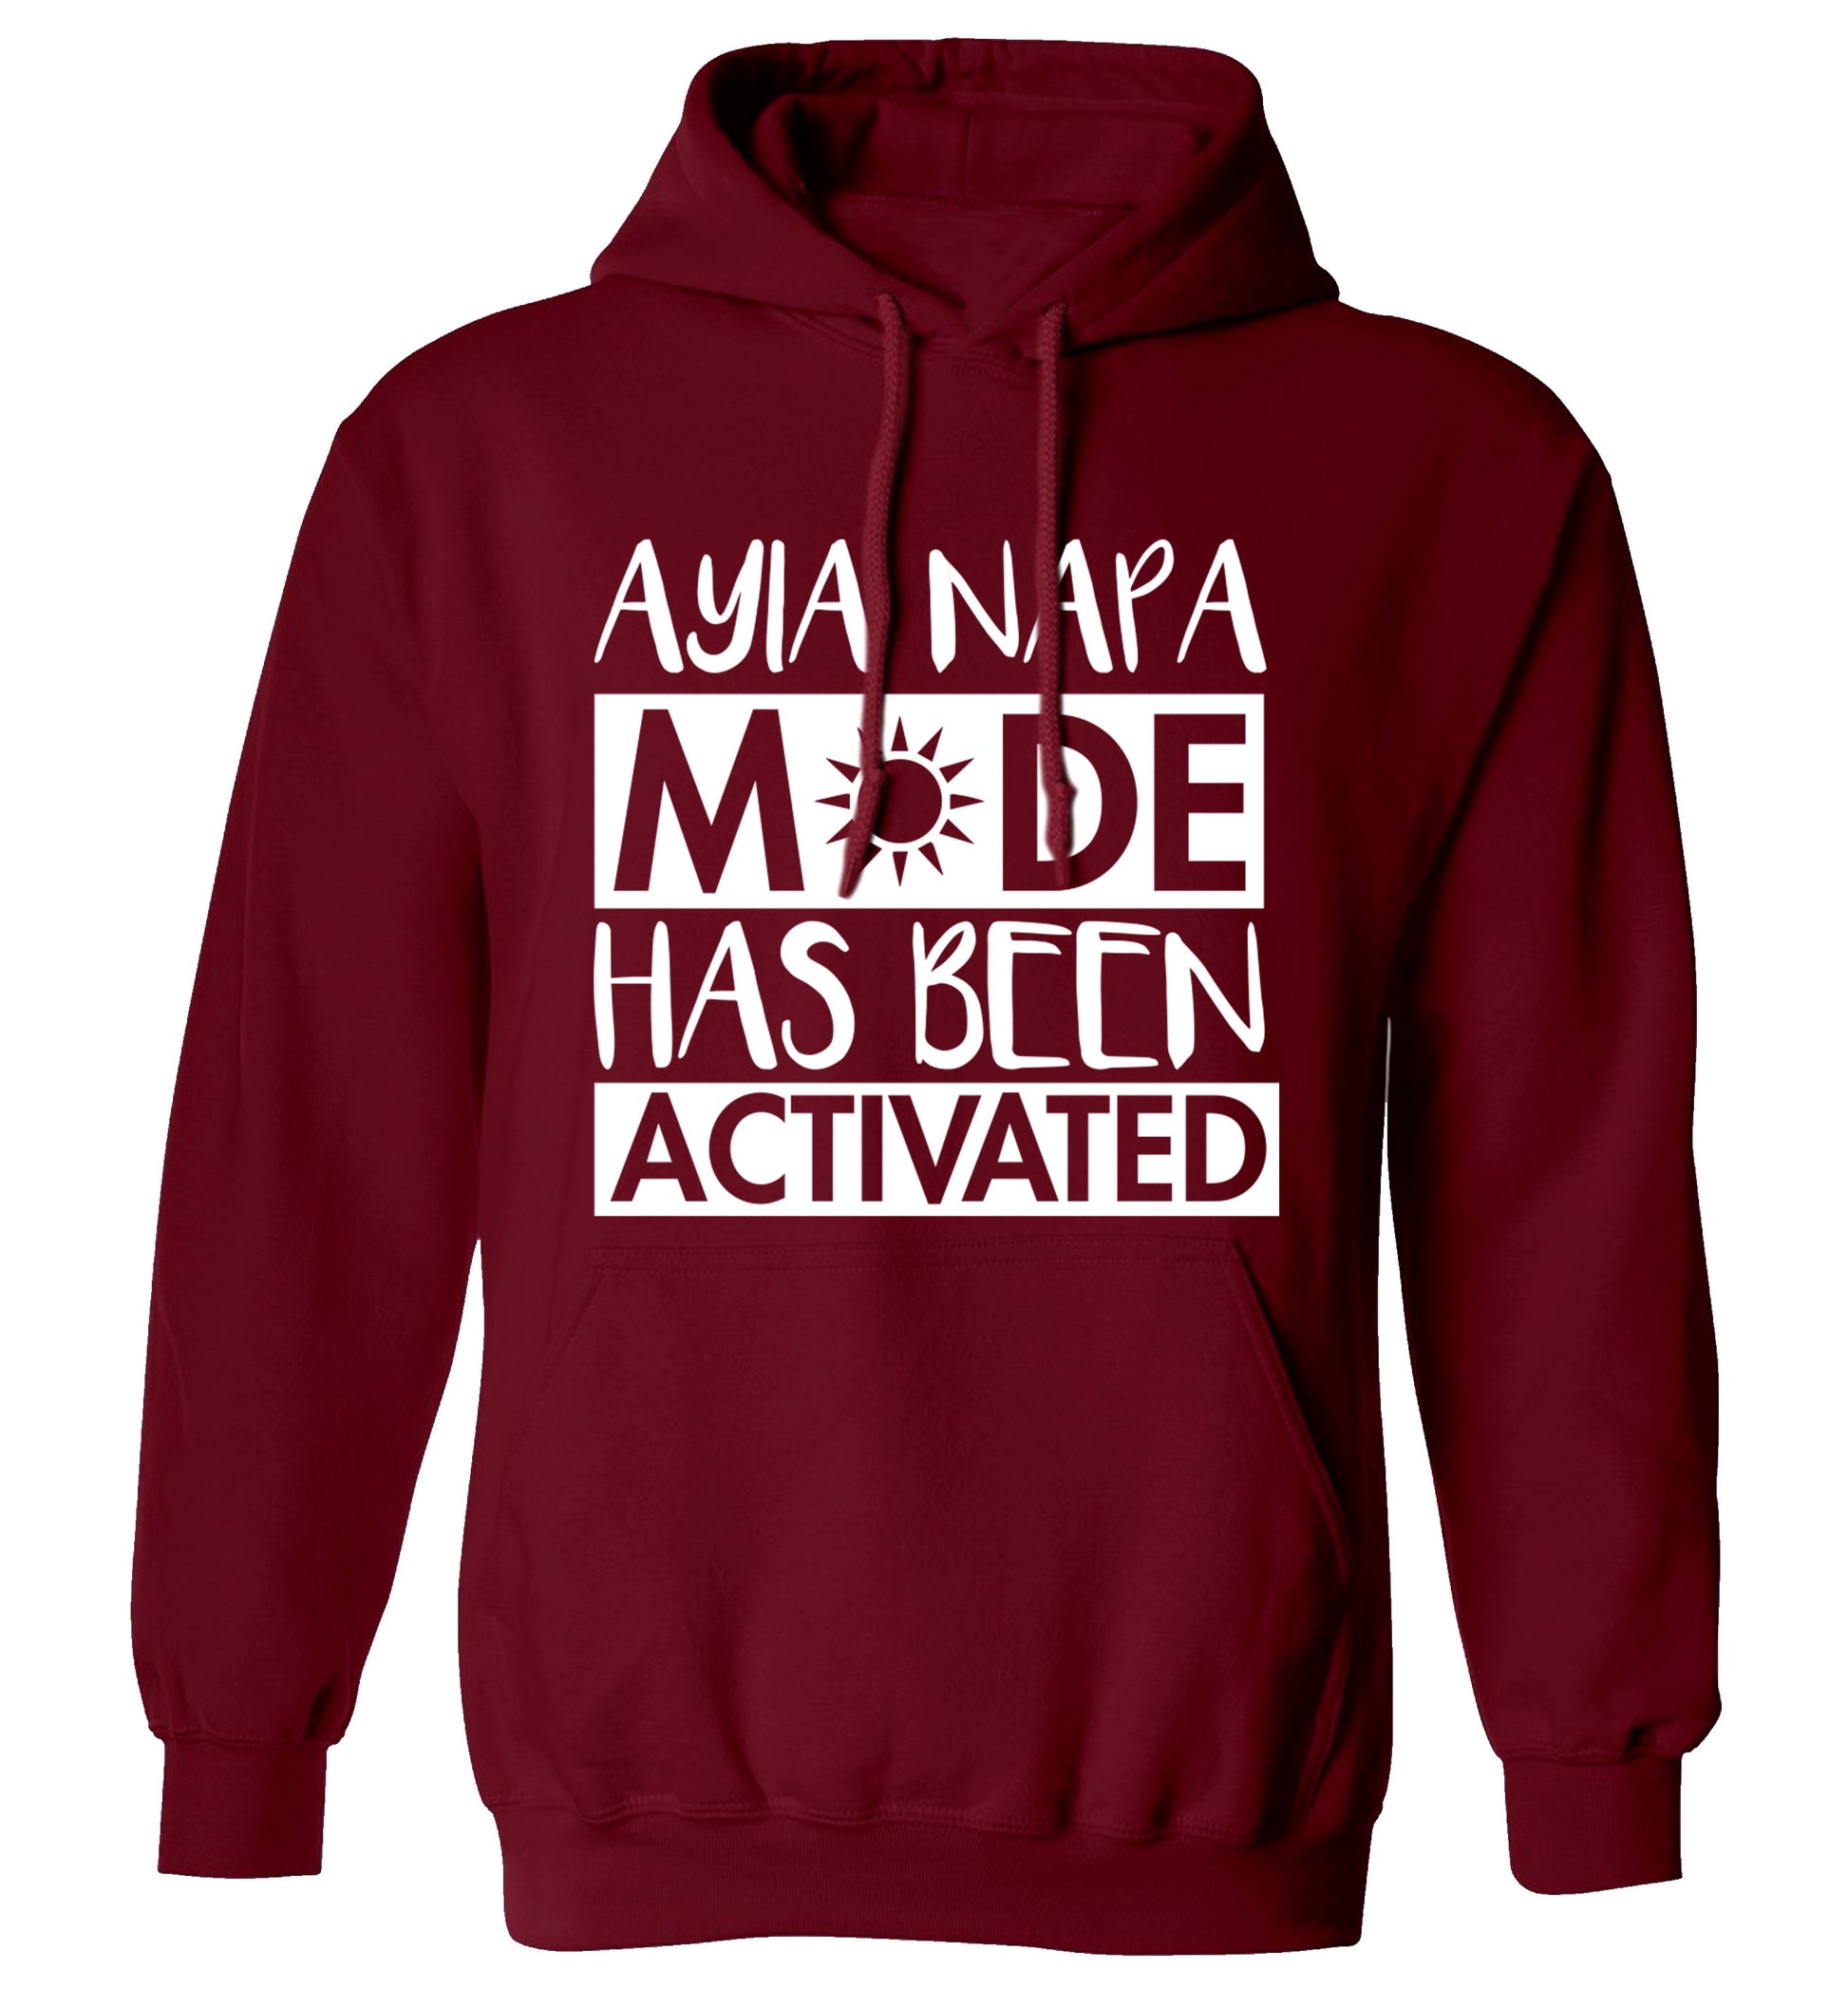 Aiya Napa mode has been activated adults unisex maroon hoodie 2XL